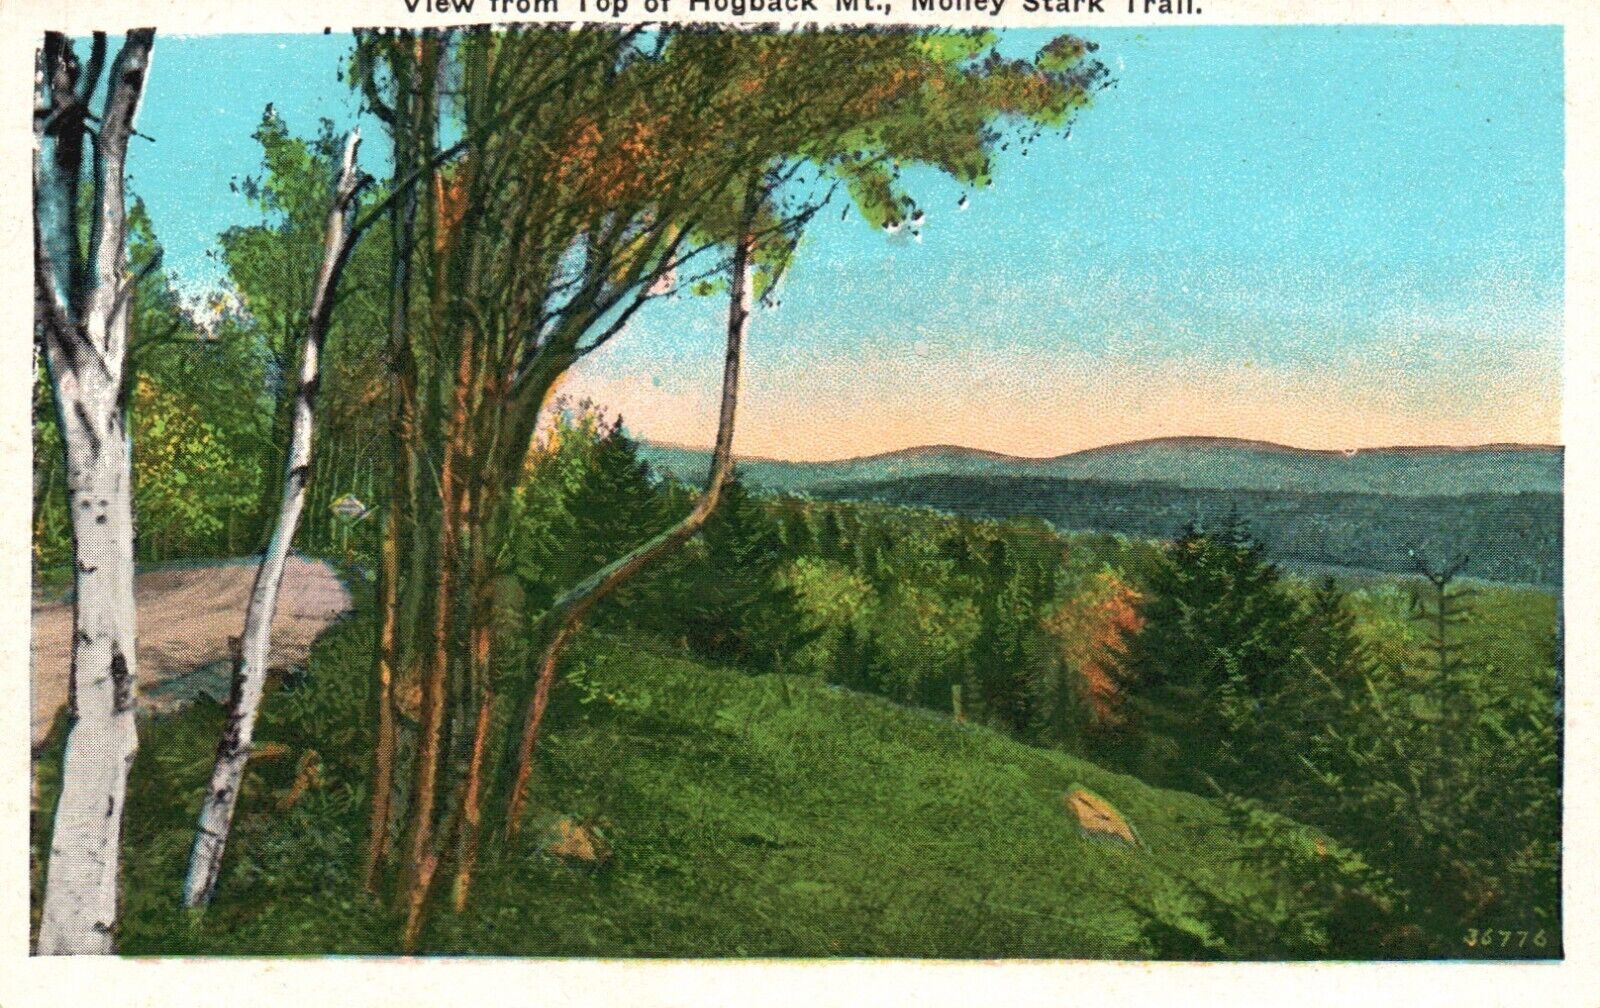 Molley Stark Trail, VT, View from Top of Hogback Mt., Vintage Postcard b6676